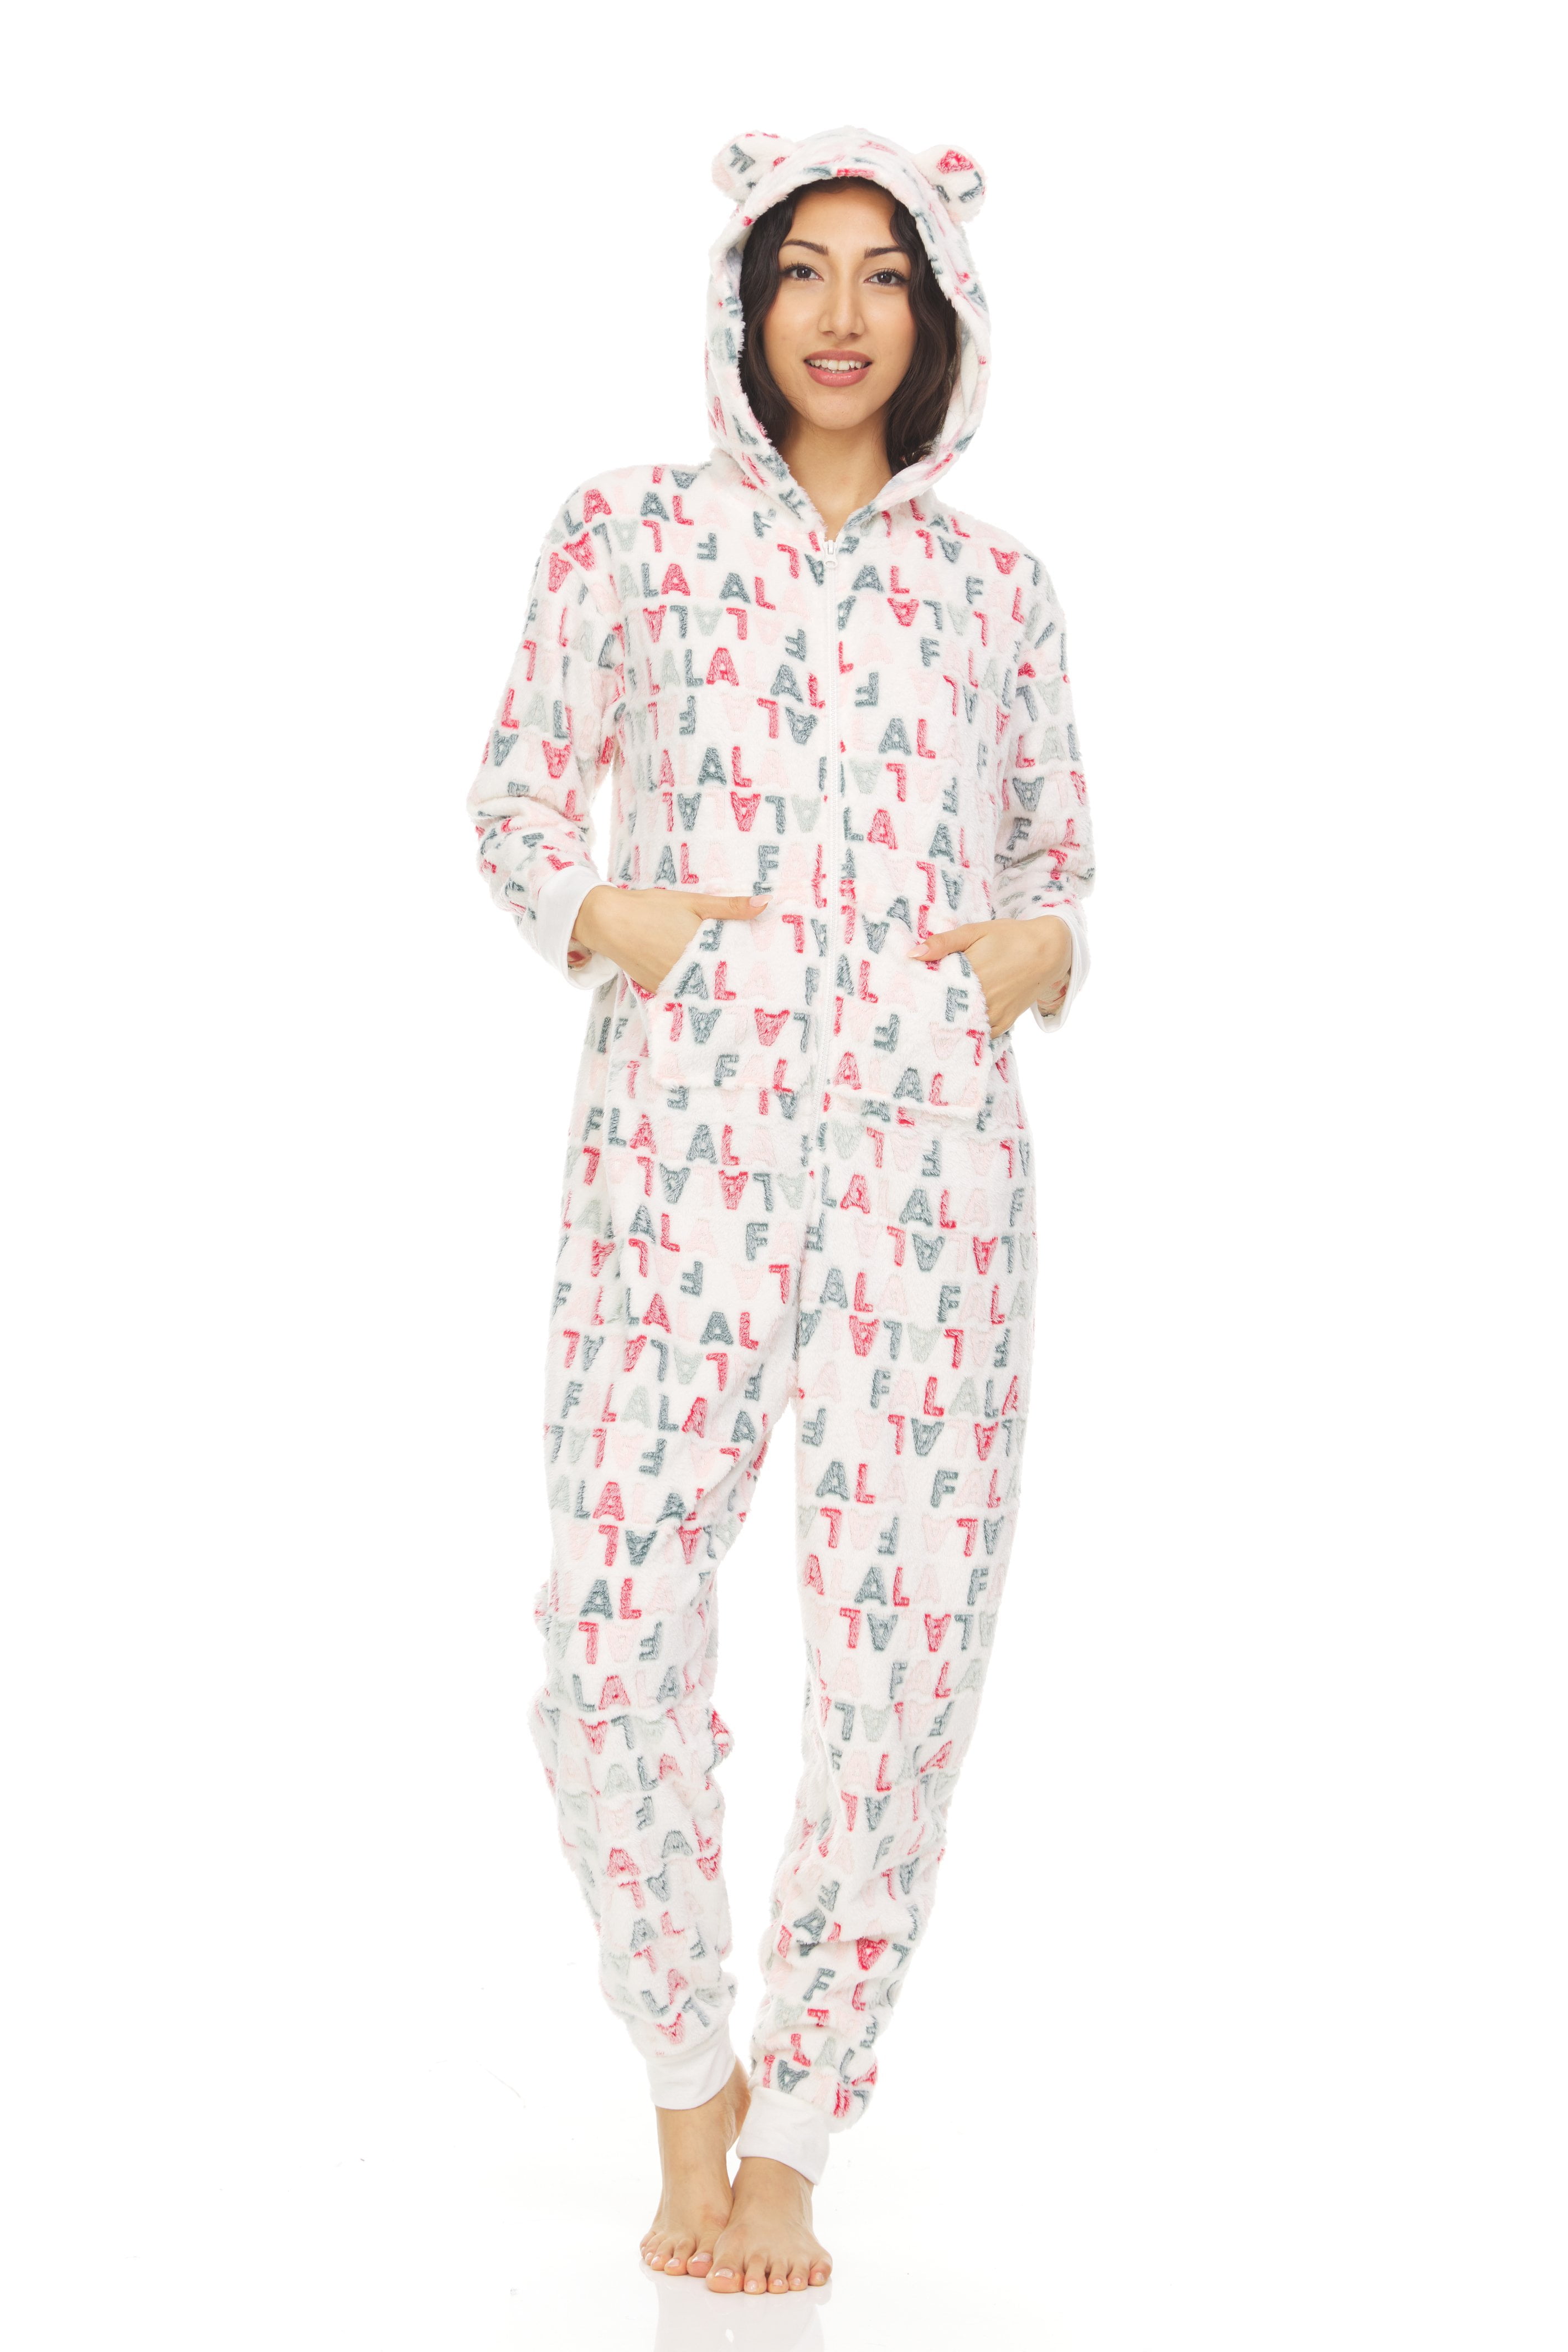 Bearpaw Women's Onesie Fuzzy Pajamas with Fluffy Hoodie and Ears, One ...